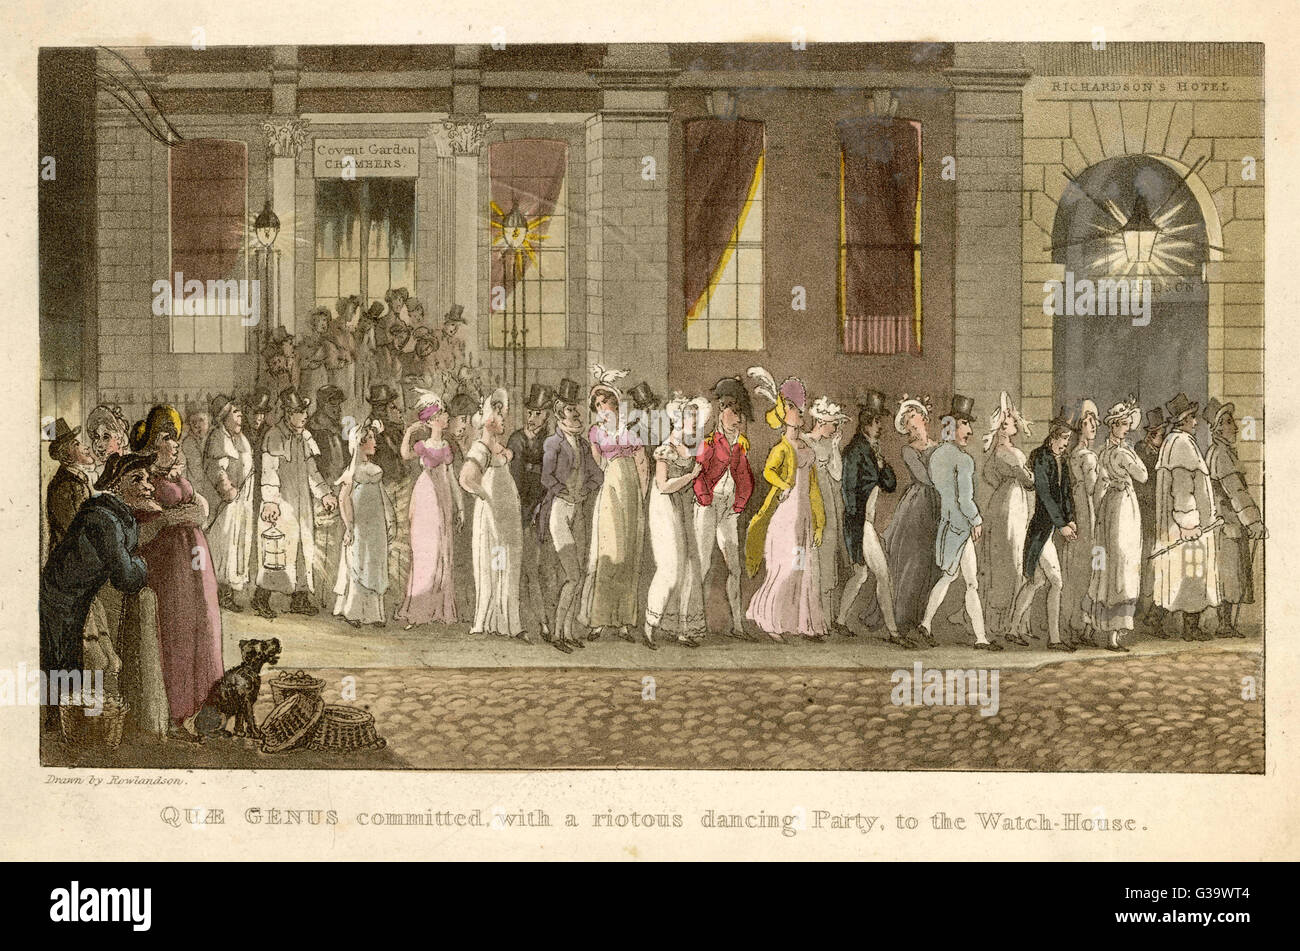 Quae Genus committed, with a  riotous dancing Party, to the  Watch-House.       Date: 1821 Stock Photo